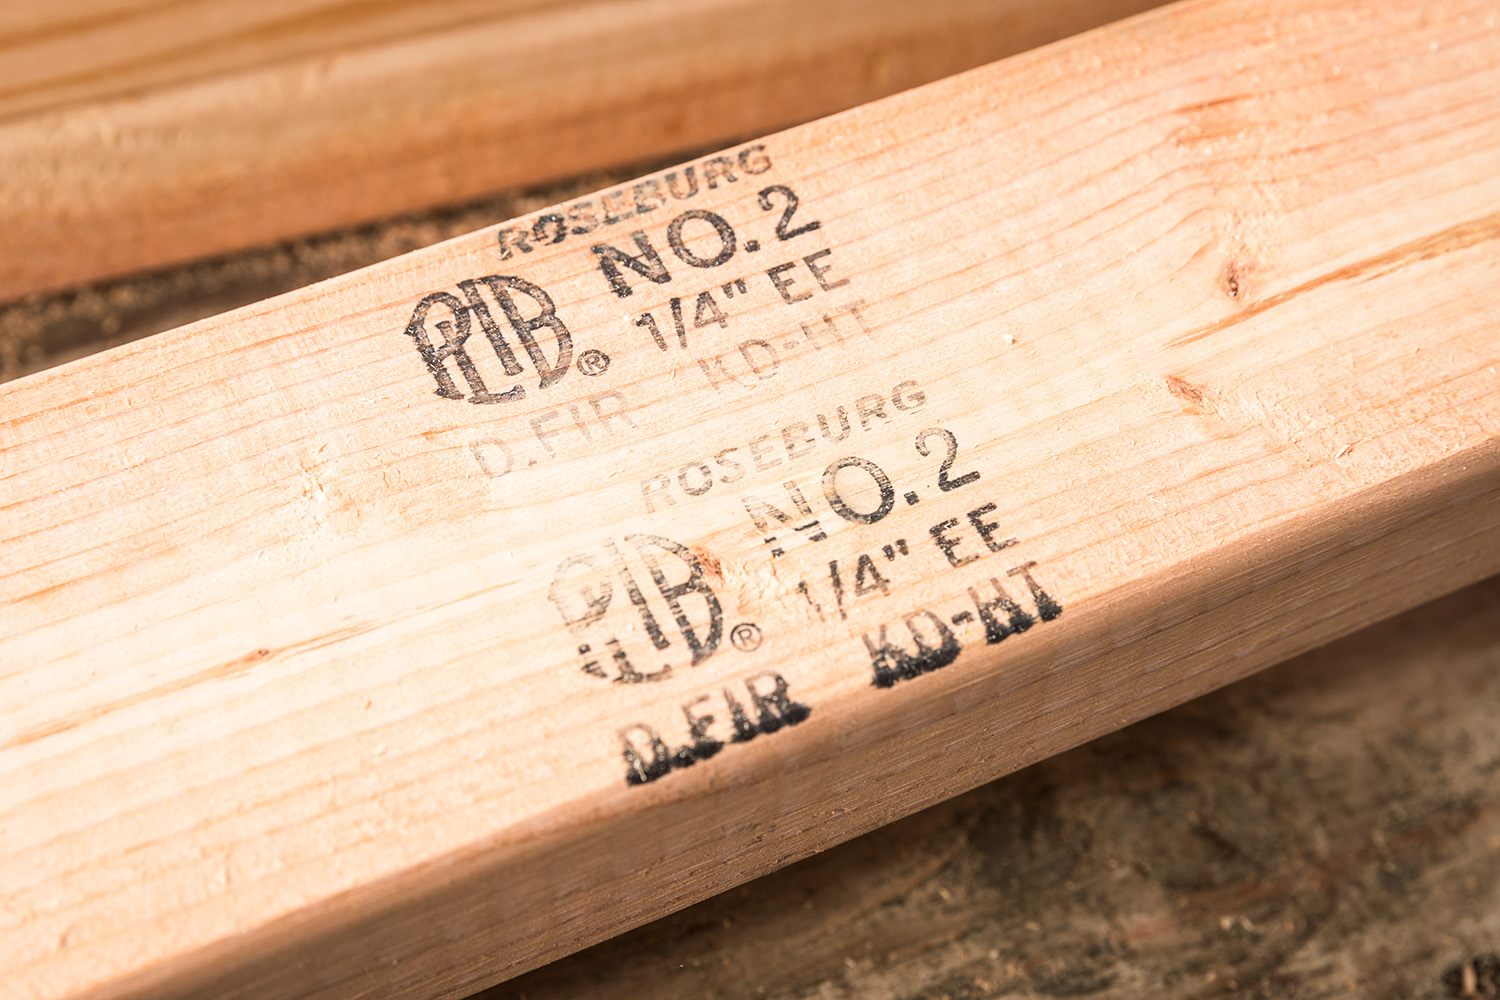 Lumber with a Roseburg No. 2 stamp